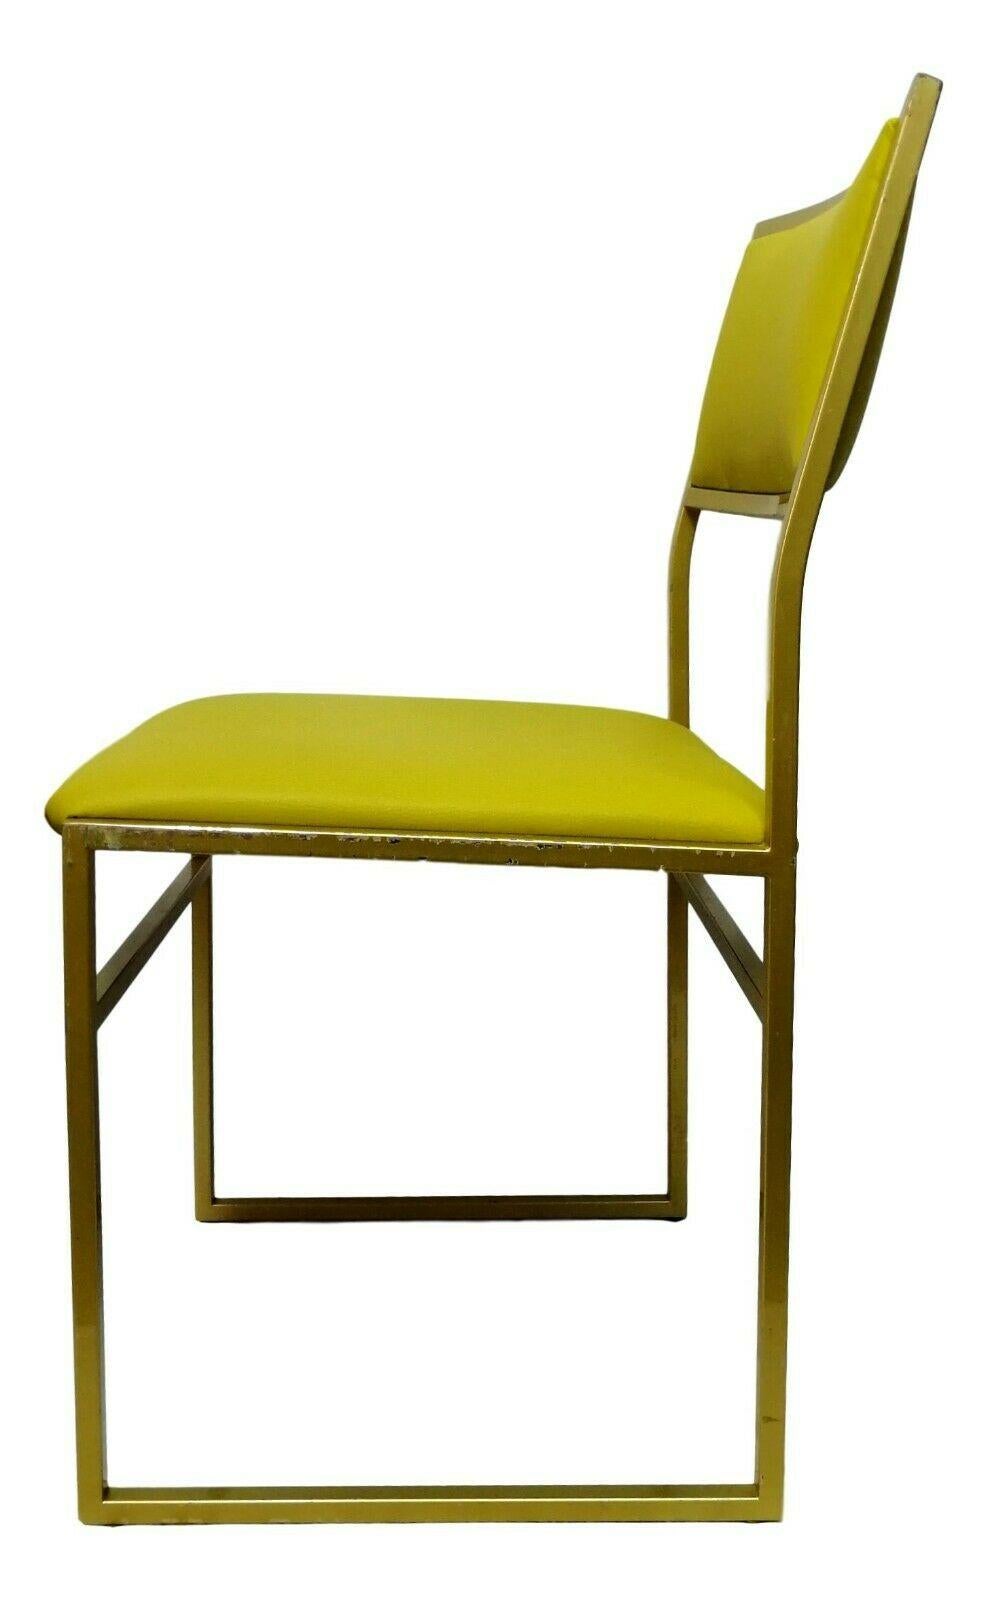 Late 20th Century Collectible Chair in Gold Metal and Acid Green Upholstery, 1970s For Sale